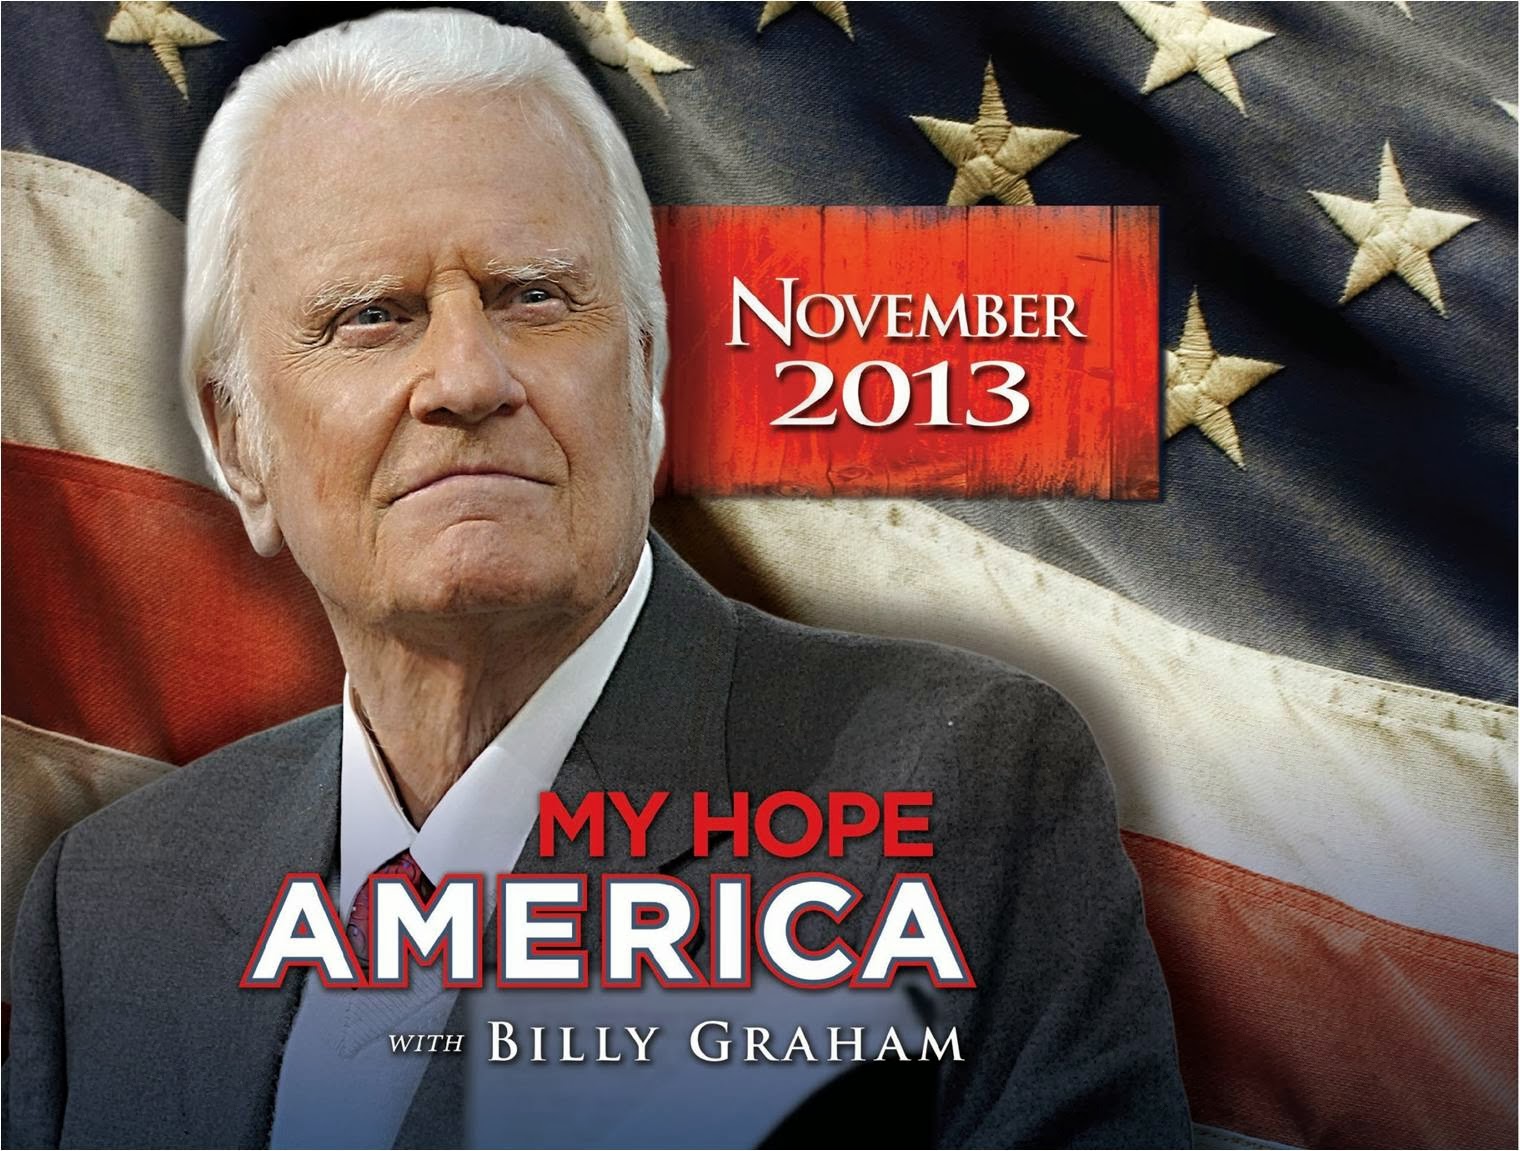 do-you-know-who-billy-graham-is-he-has-hope-for-you-america-grown-people-talking